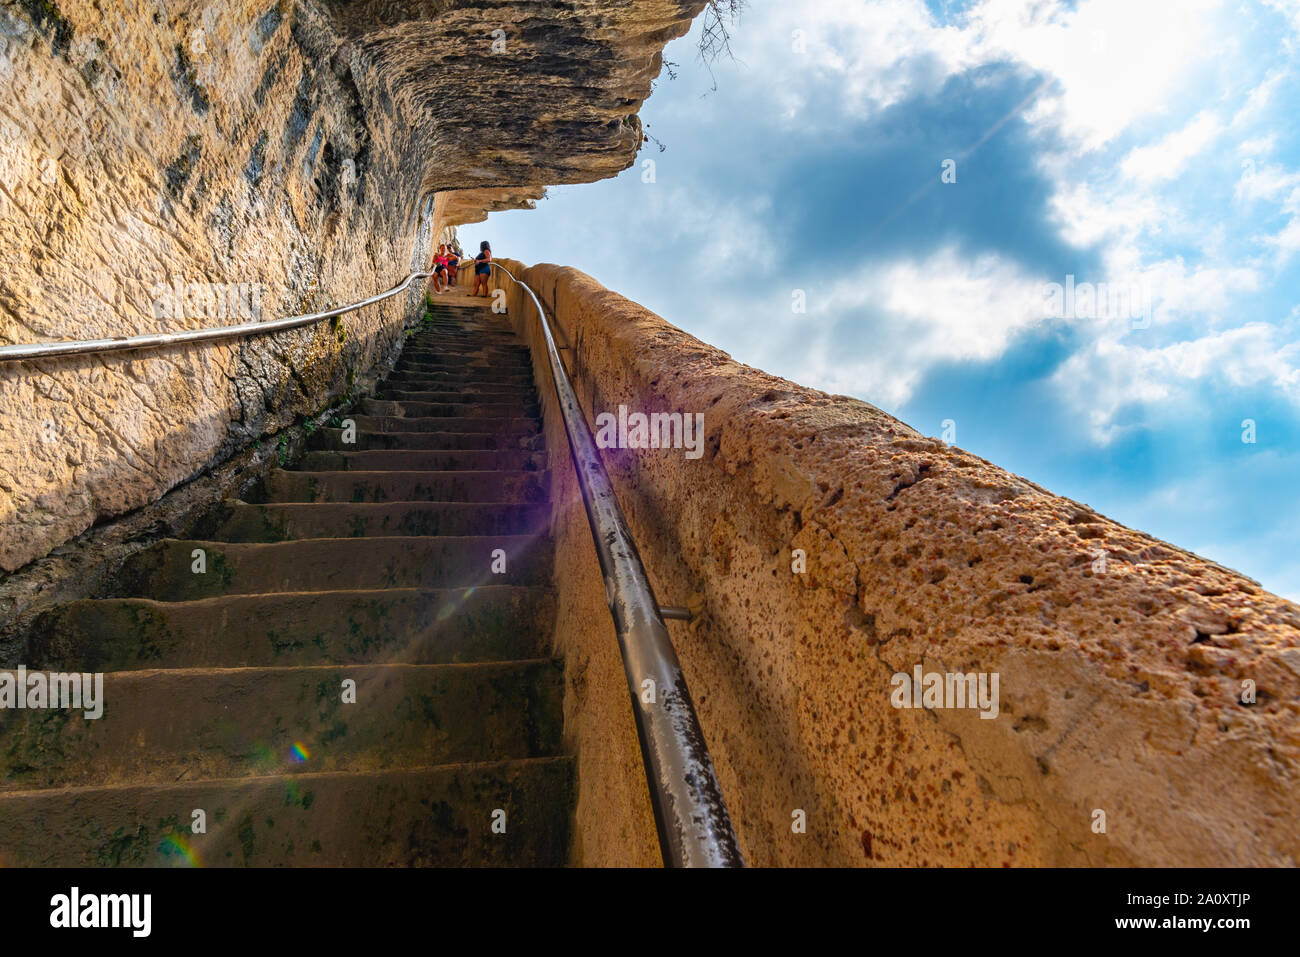 The Narrow and Steep Steps Down the Cliff Stock Photo - Image of steps,  rocks: 135575192